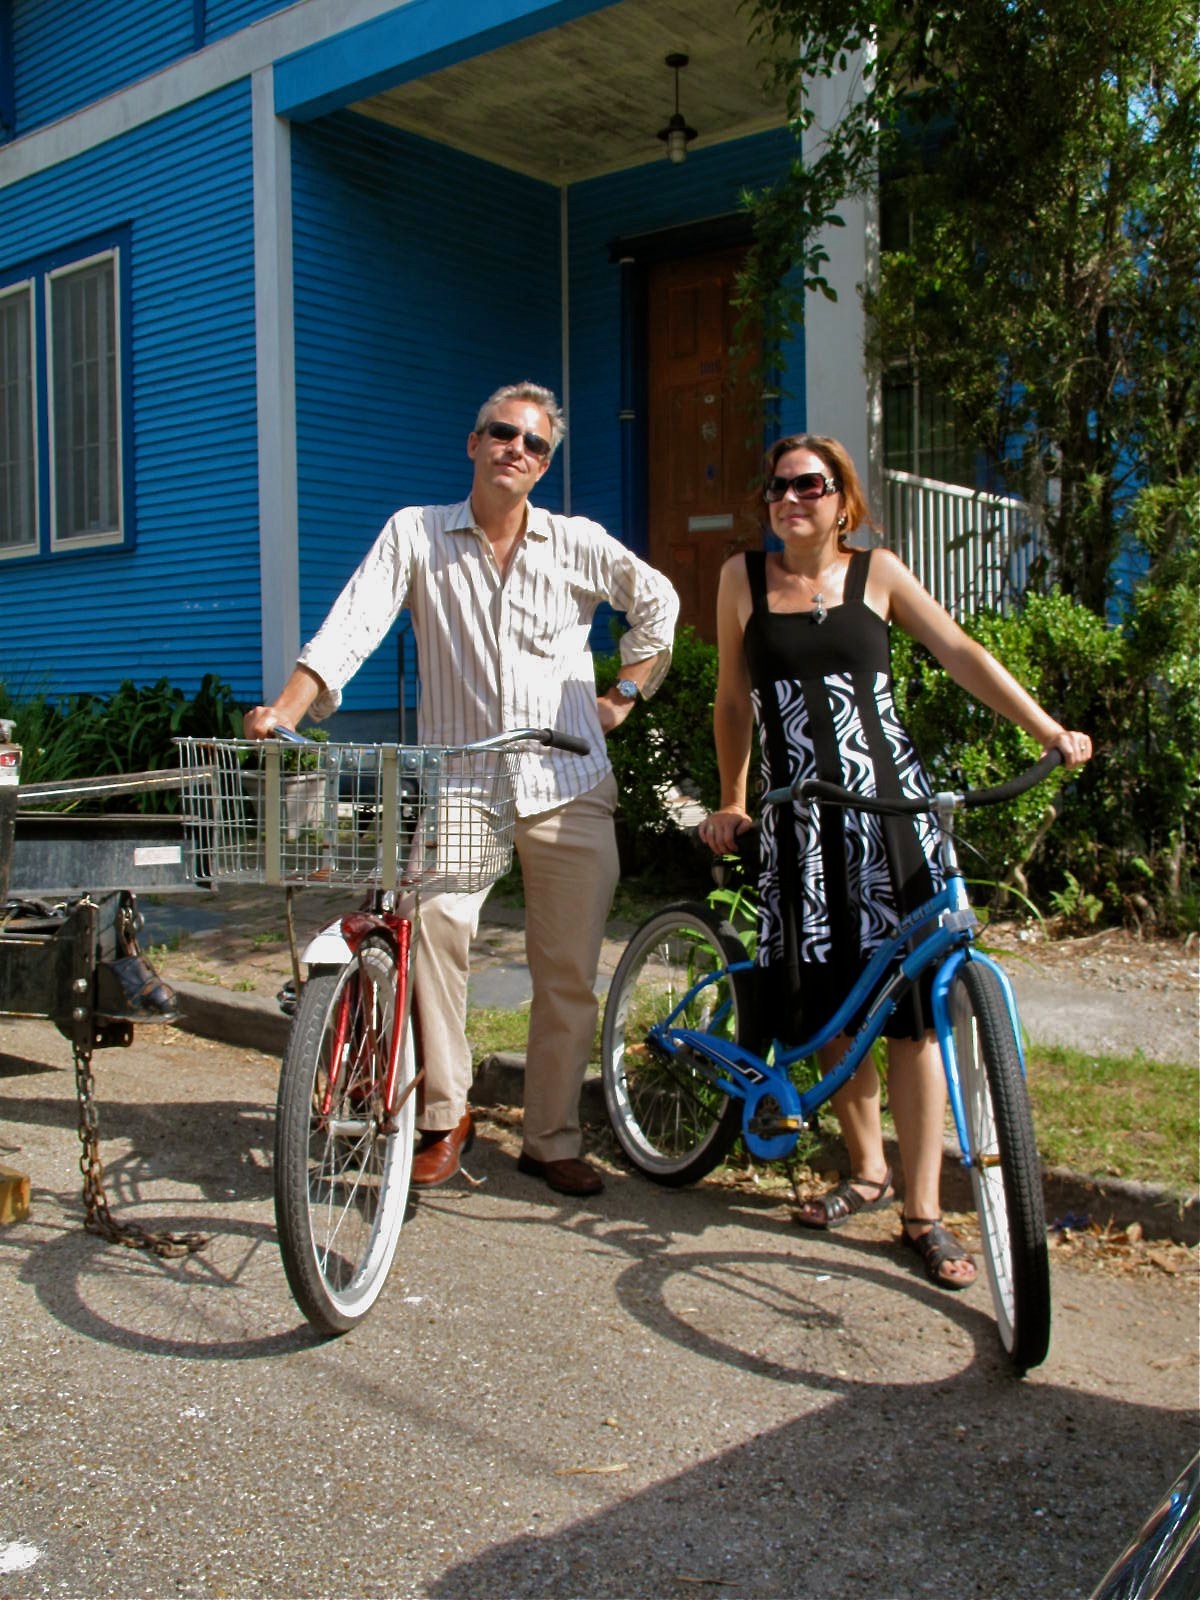 John and Colleen with bikes in New Orleans 2011